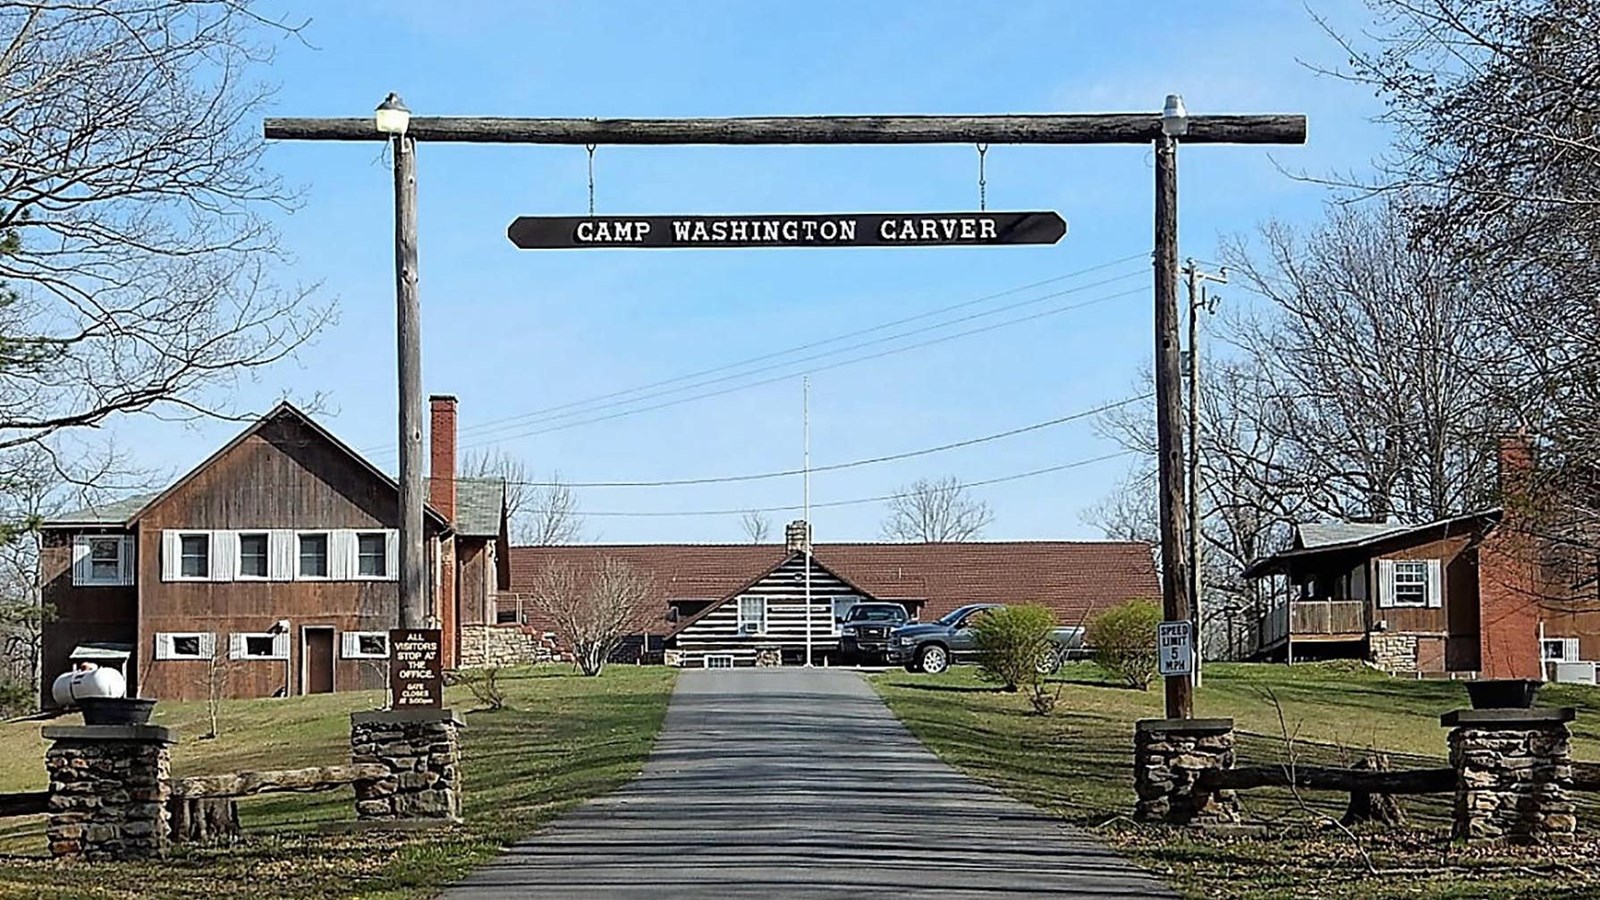 camp lodge with Camp Washington Carver sign over entrance road